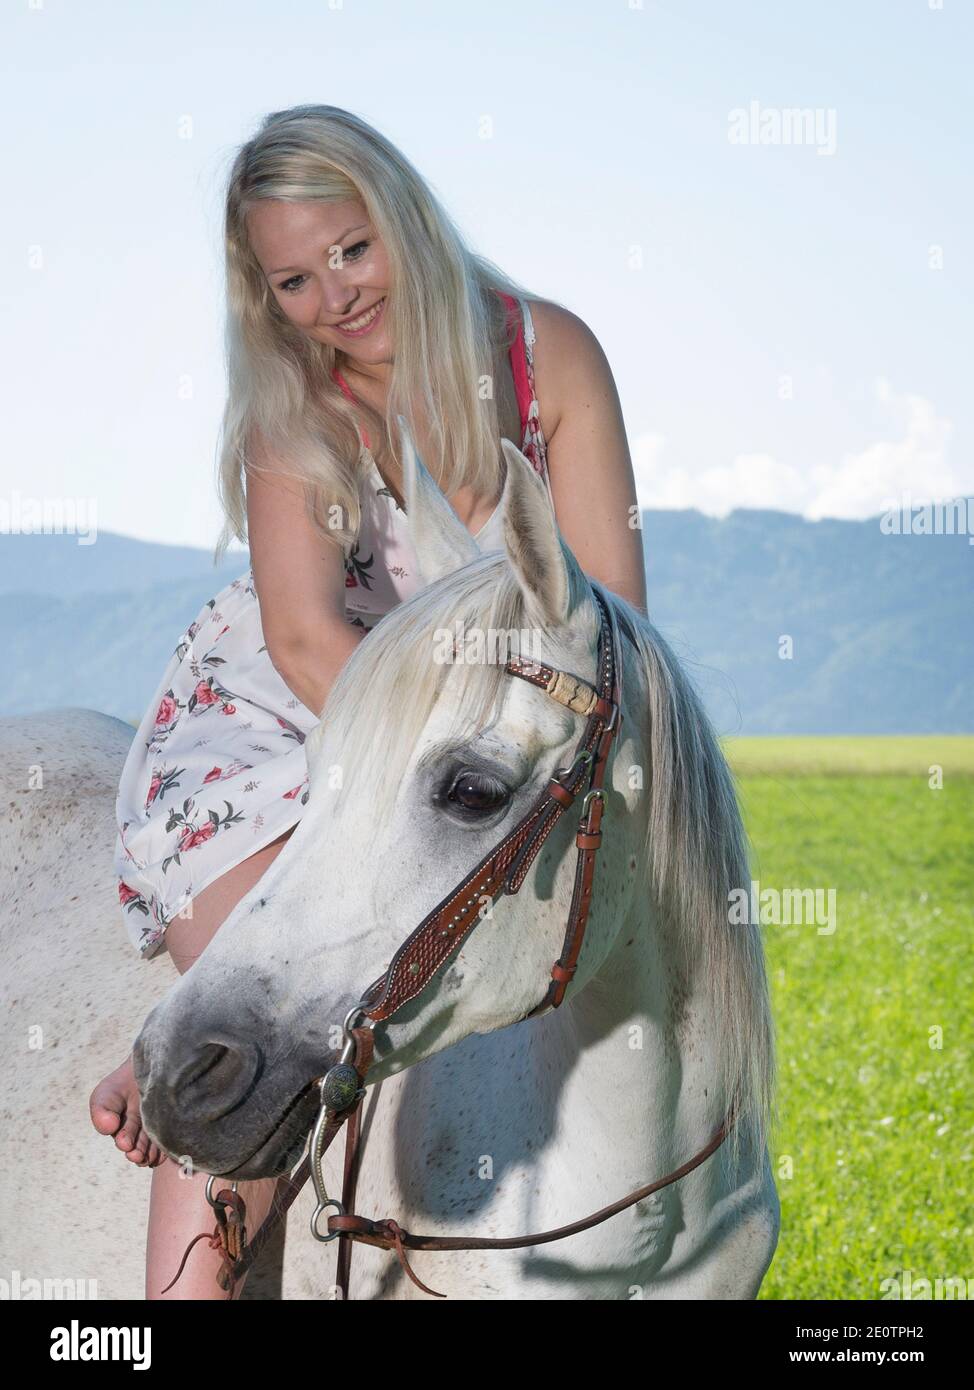 Young Pretty Woman With Long Blond Hair Is Sitting In Summer Dress On Her Horse Stock Photo